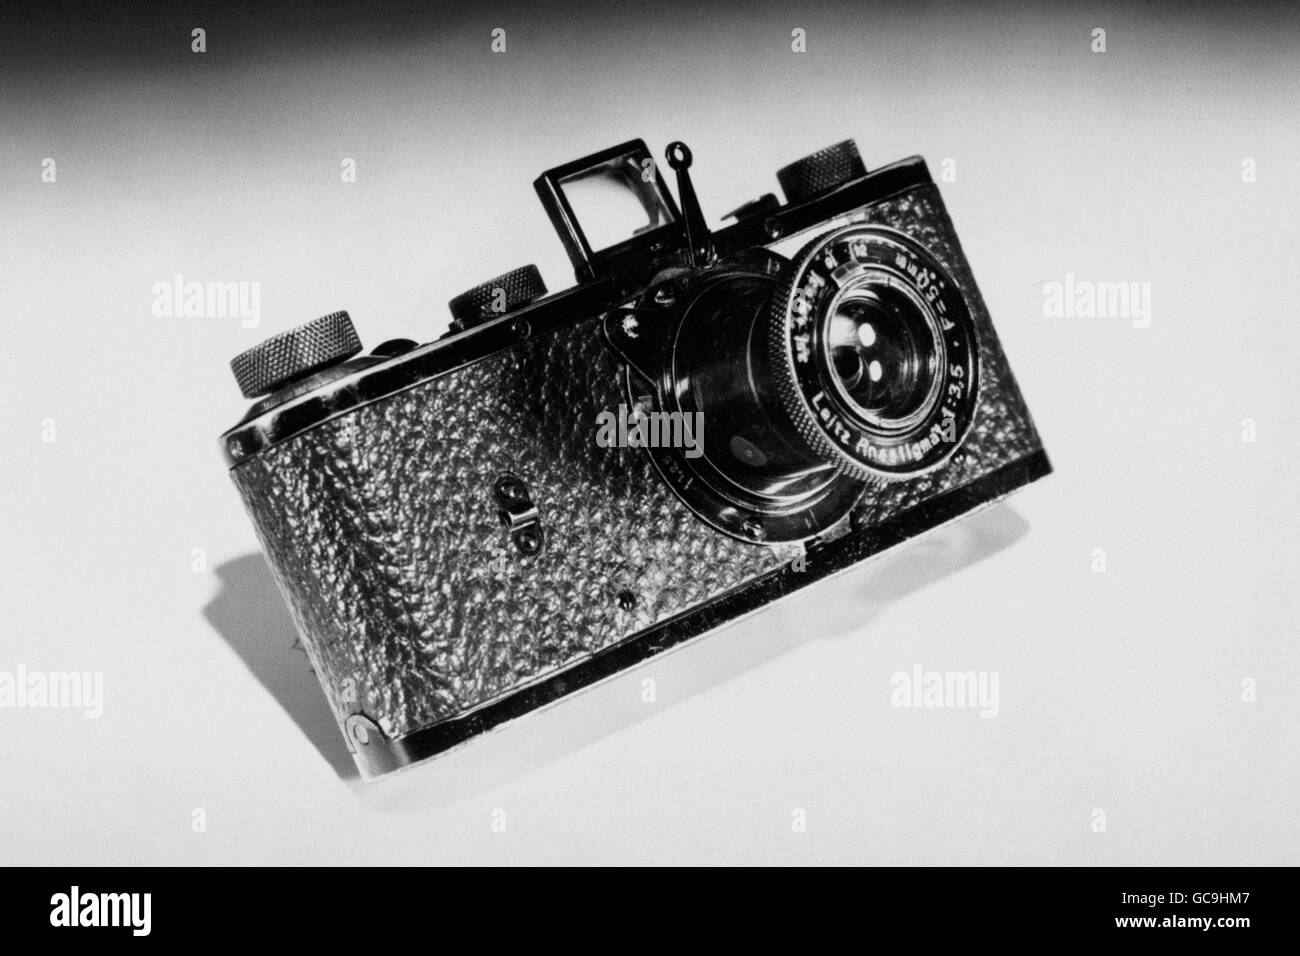 LEICA 'O' [NULL] SERIES, NO 112 CAMERA, BUILT 1923-4 - ESTIMATED VALUE 100,000, THE STAR LOT OF CHRISTIE'S LEICA CAMERA AUCTION. Stock Photo